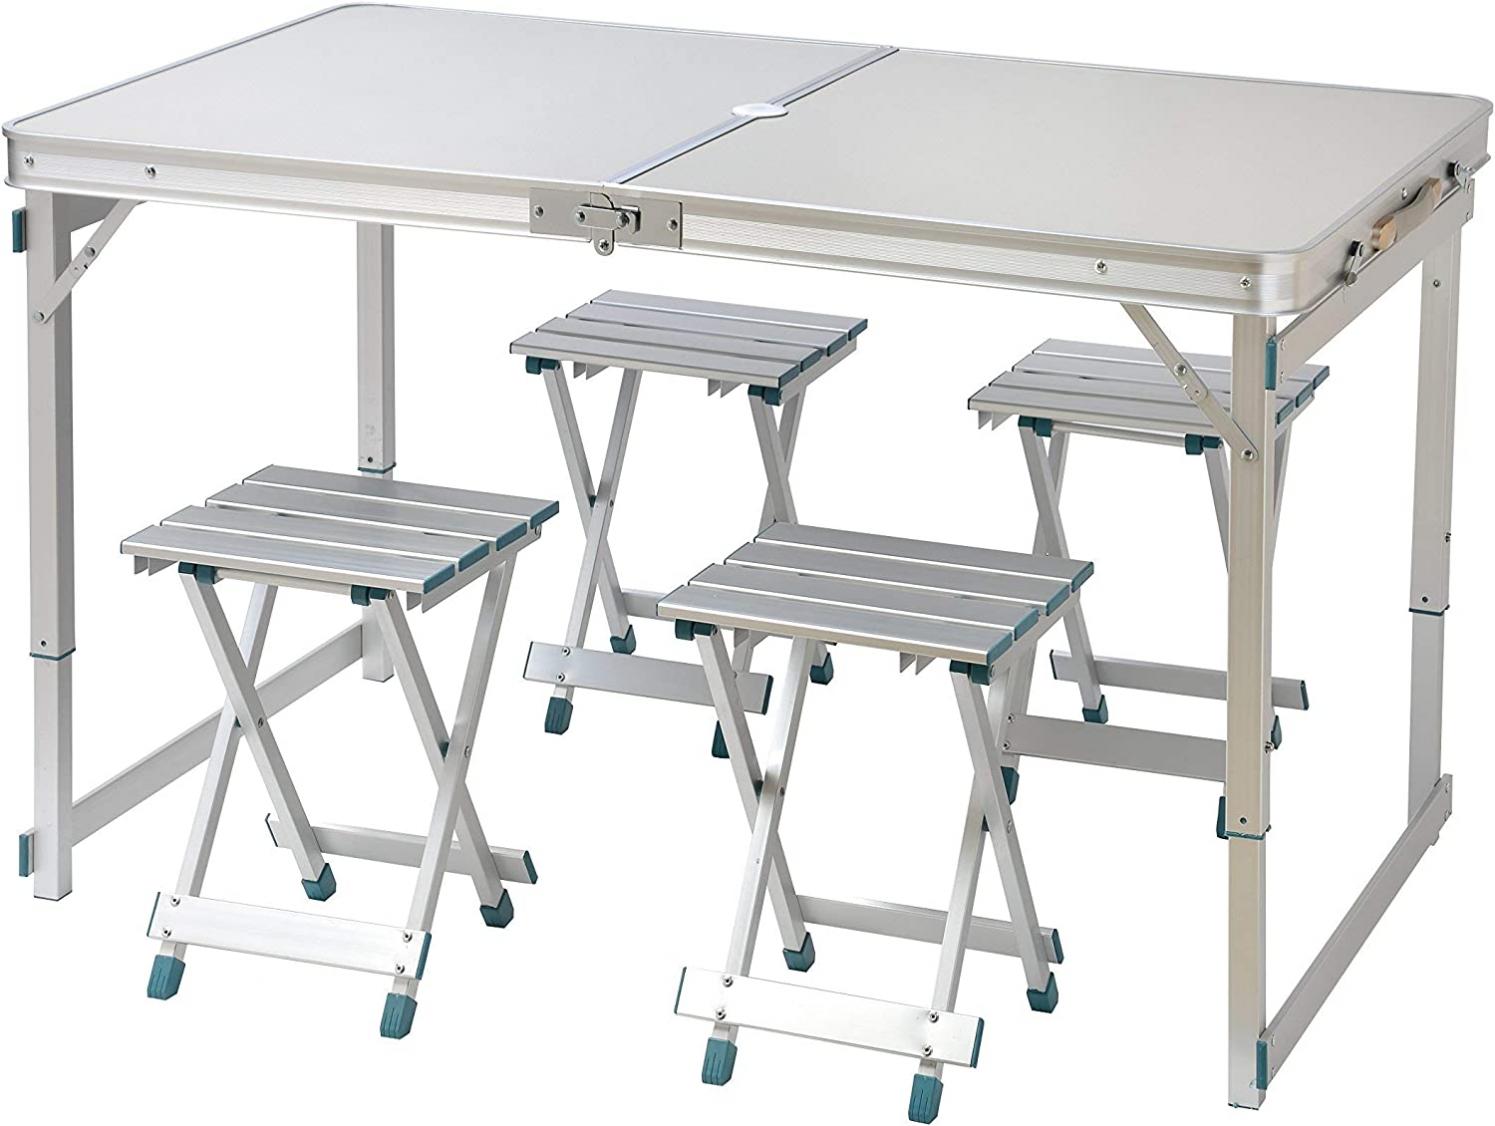 Trademark Innovations 4 Person Aluminum Lightweight Folding Camp Table with 4 Folding Stools